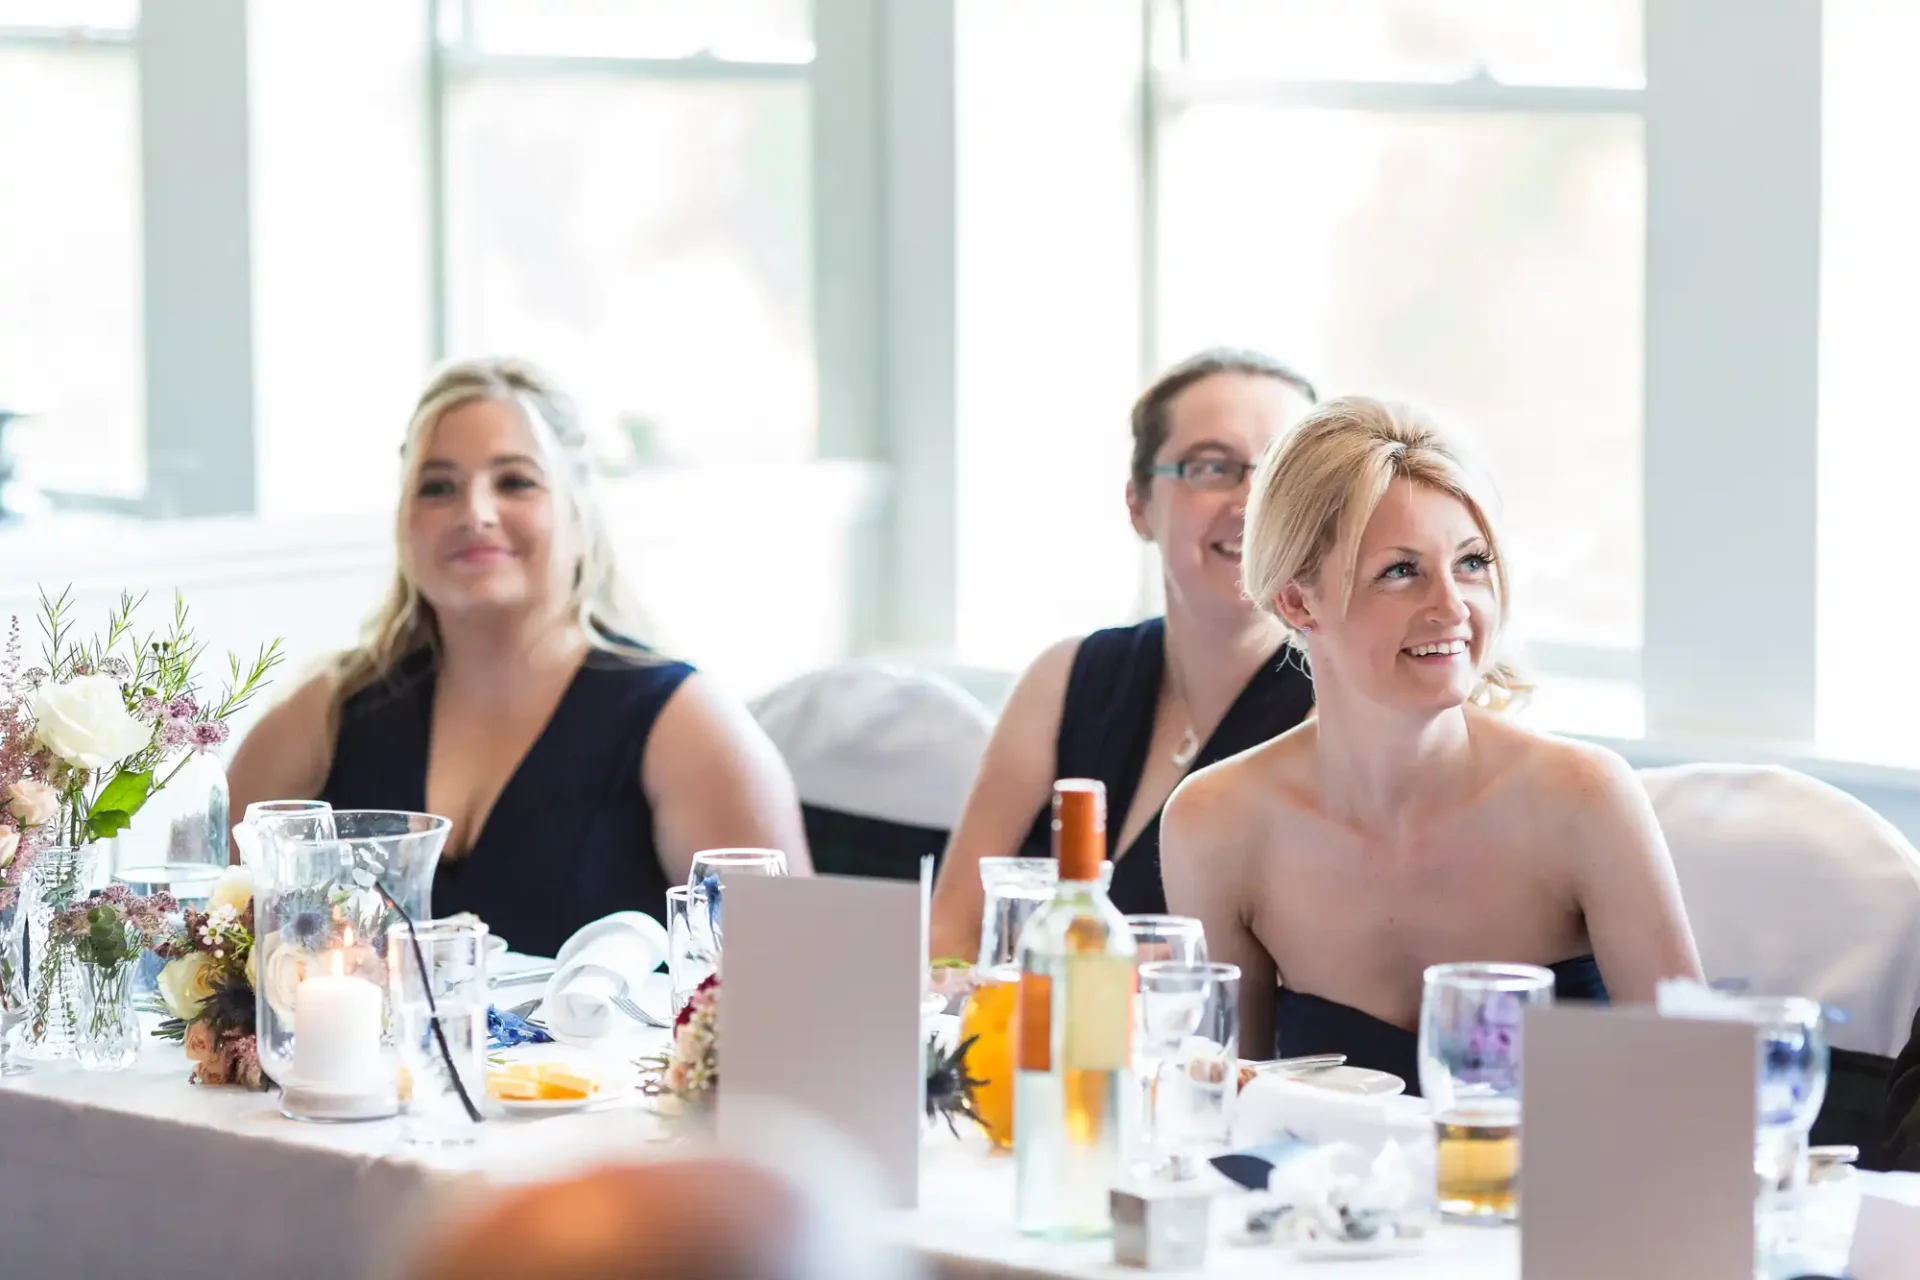 Guests at a wedding reception table, smiling and enjoying the event, with a focus on a blonde woman in the foreground. elegantly dressed with natural light streaming through windows.